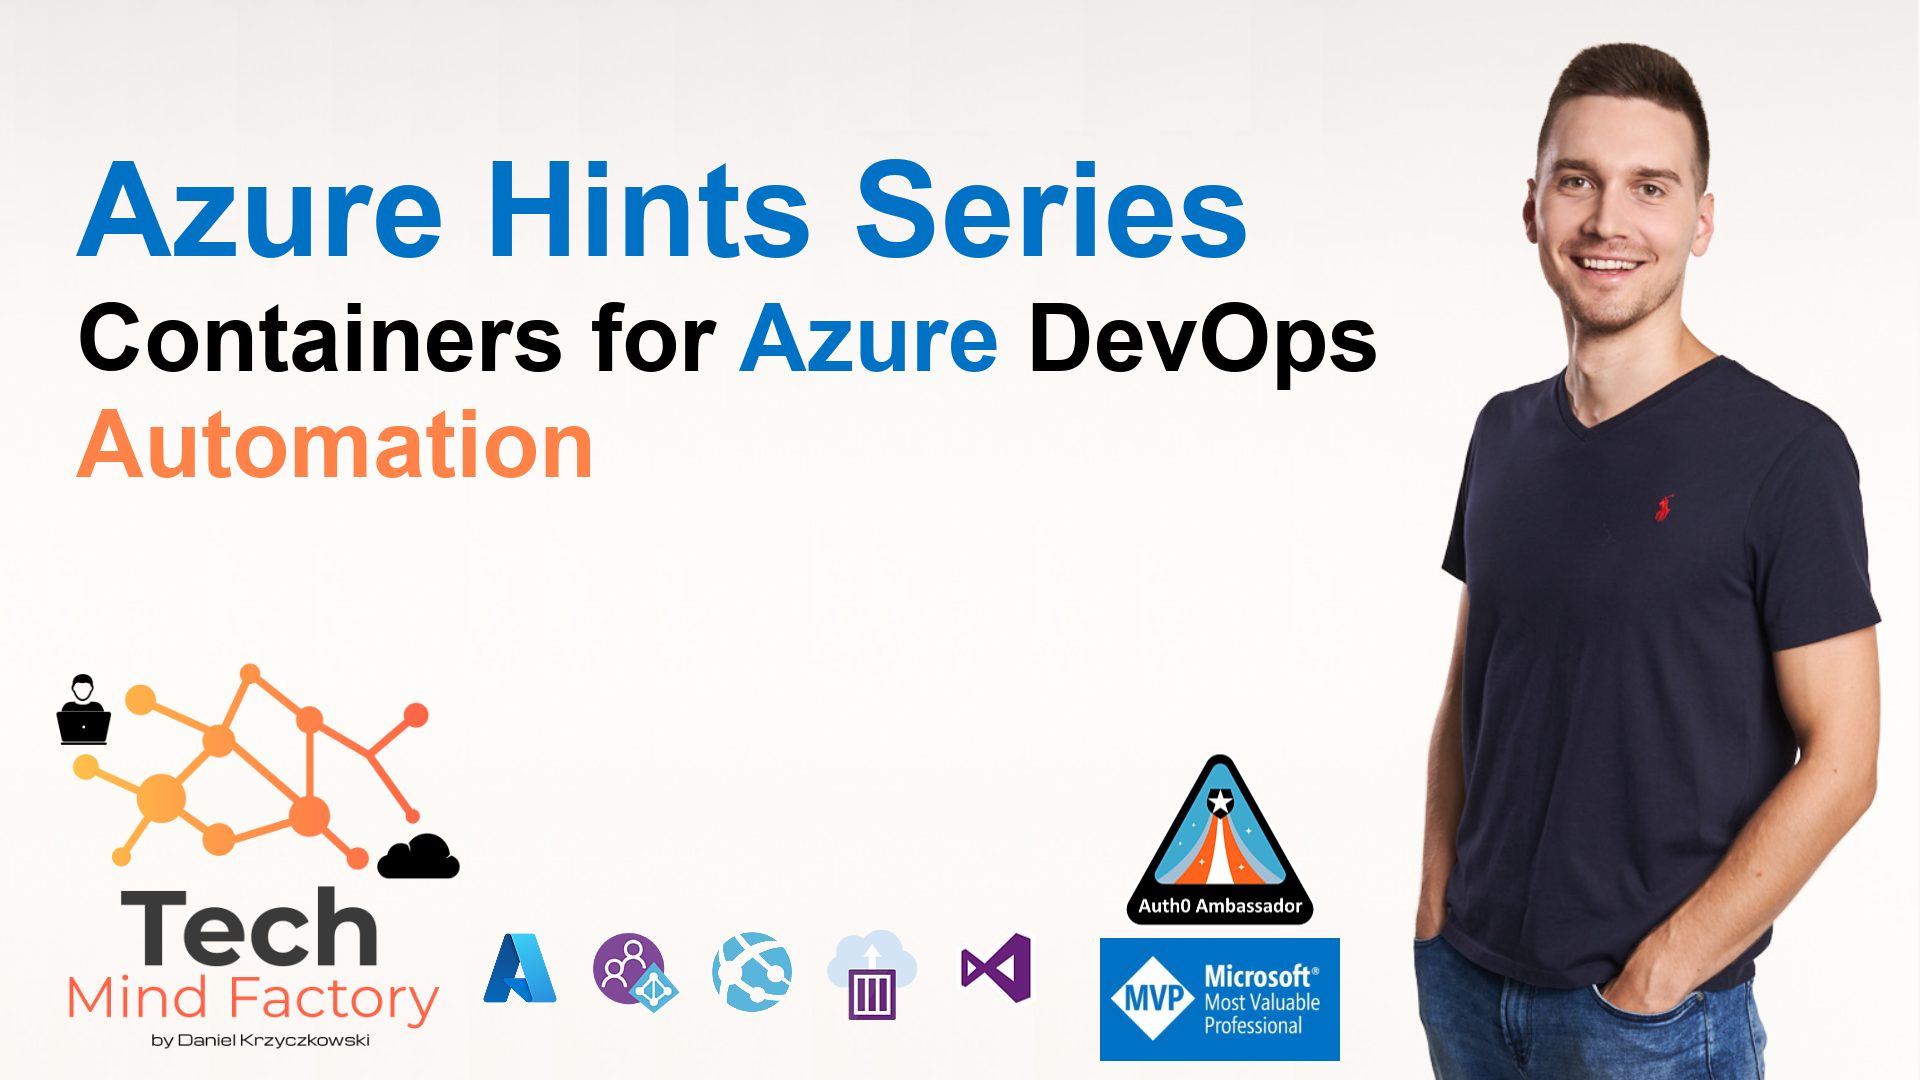 Azure Hints Series - Containers for Azure DevOps Automation